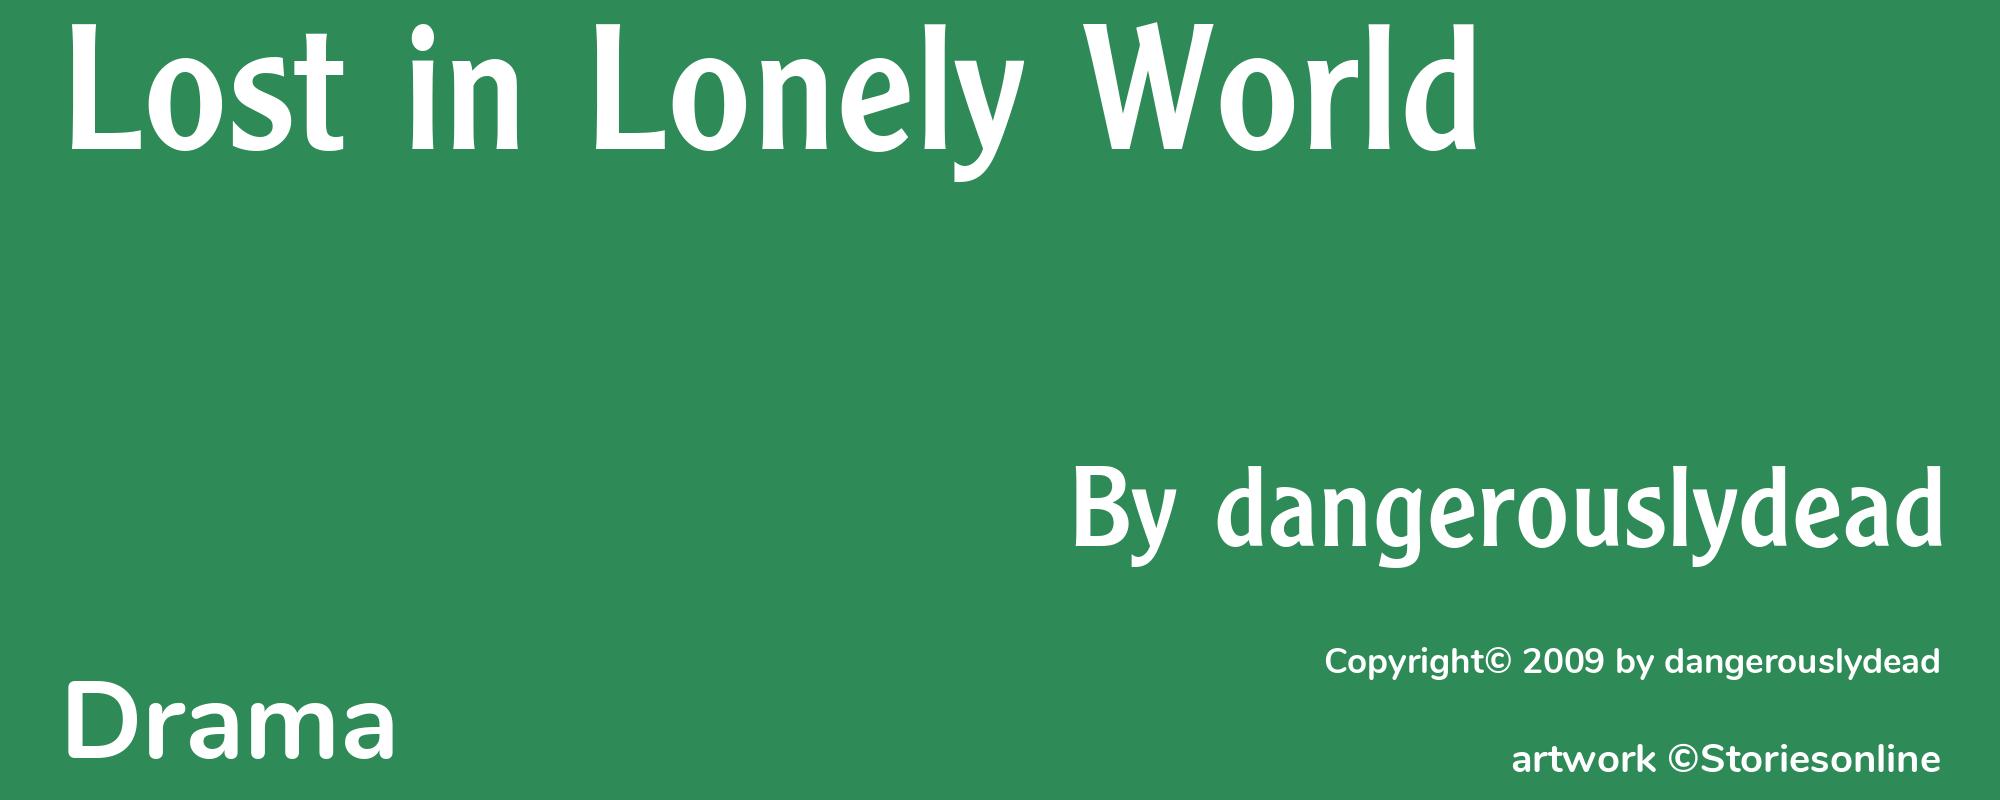 Lost in Lonely World - Cover